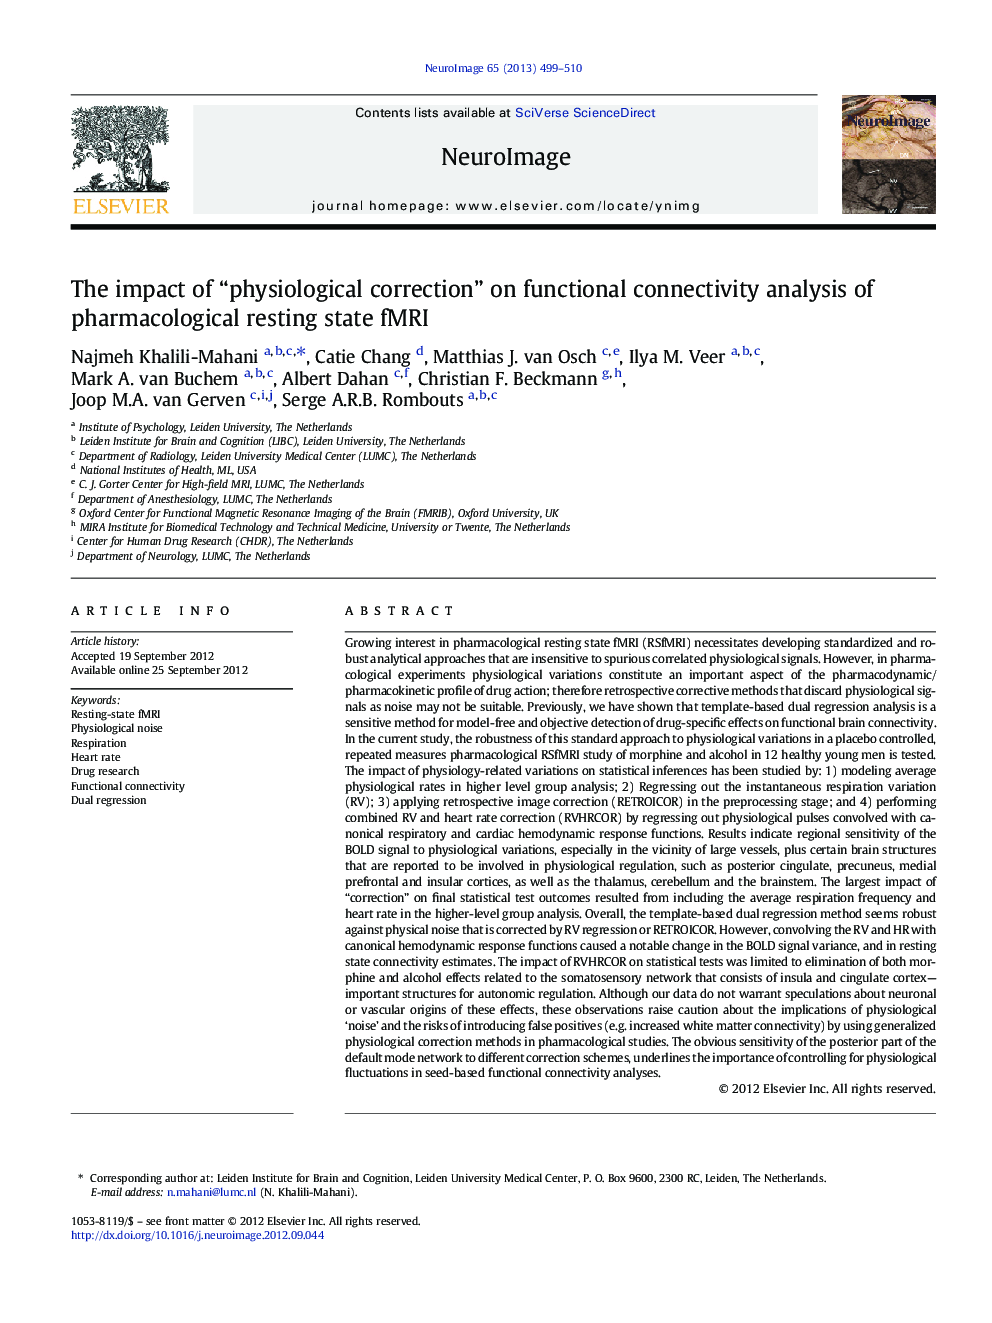 The impact of “physiological correction” on functional connectivity analysis of pharmacological resting state fMRI